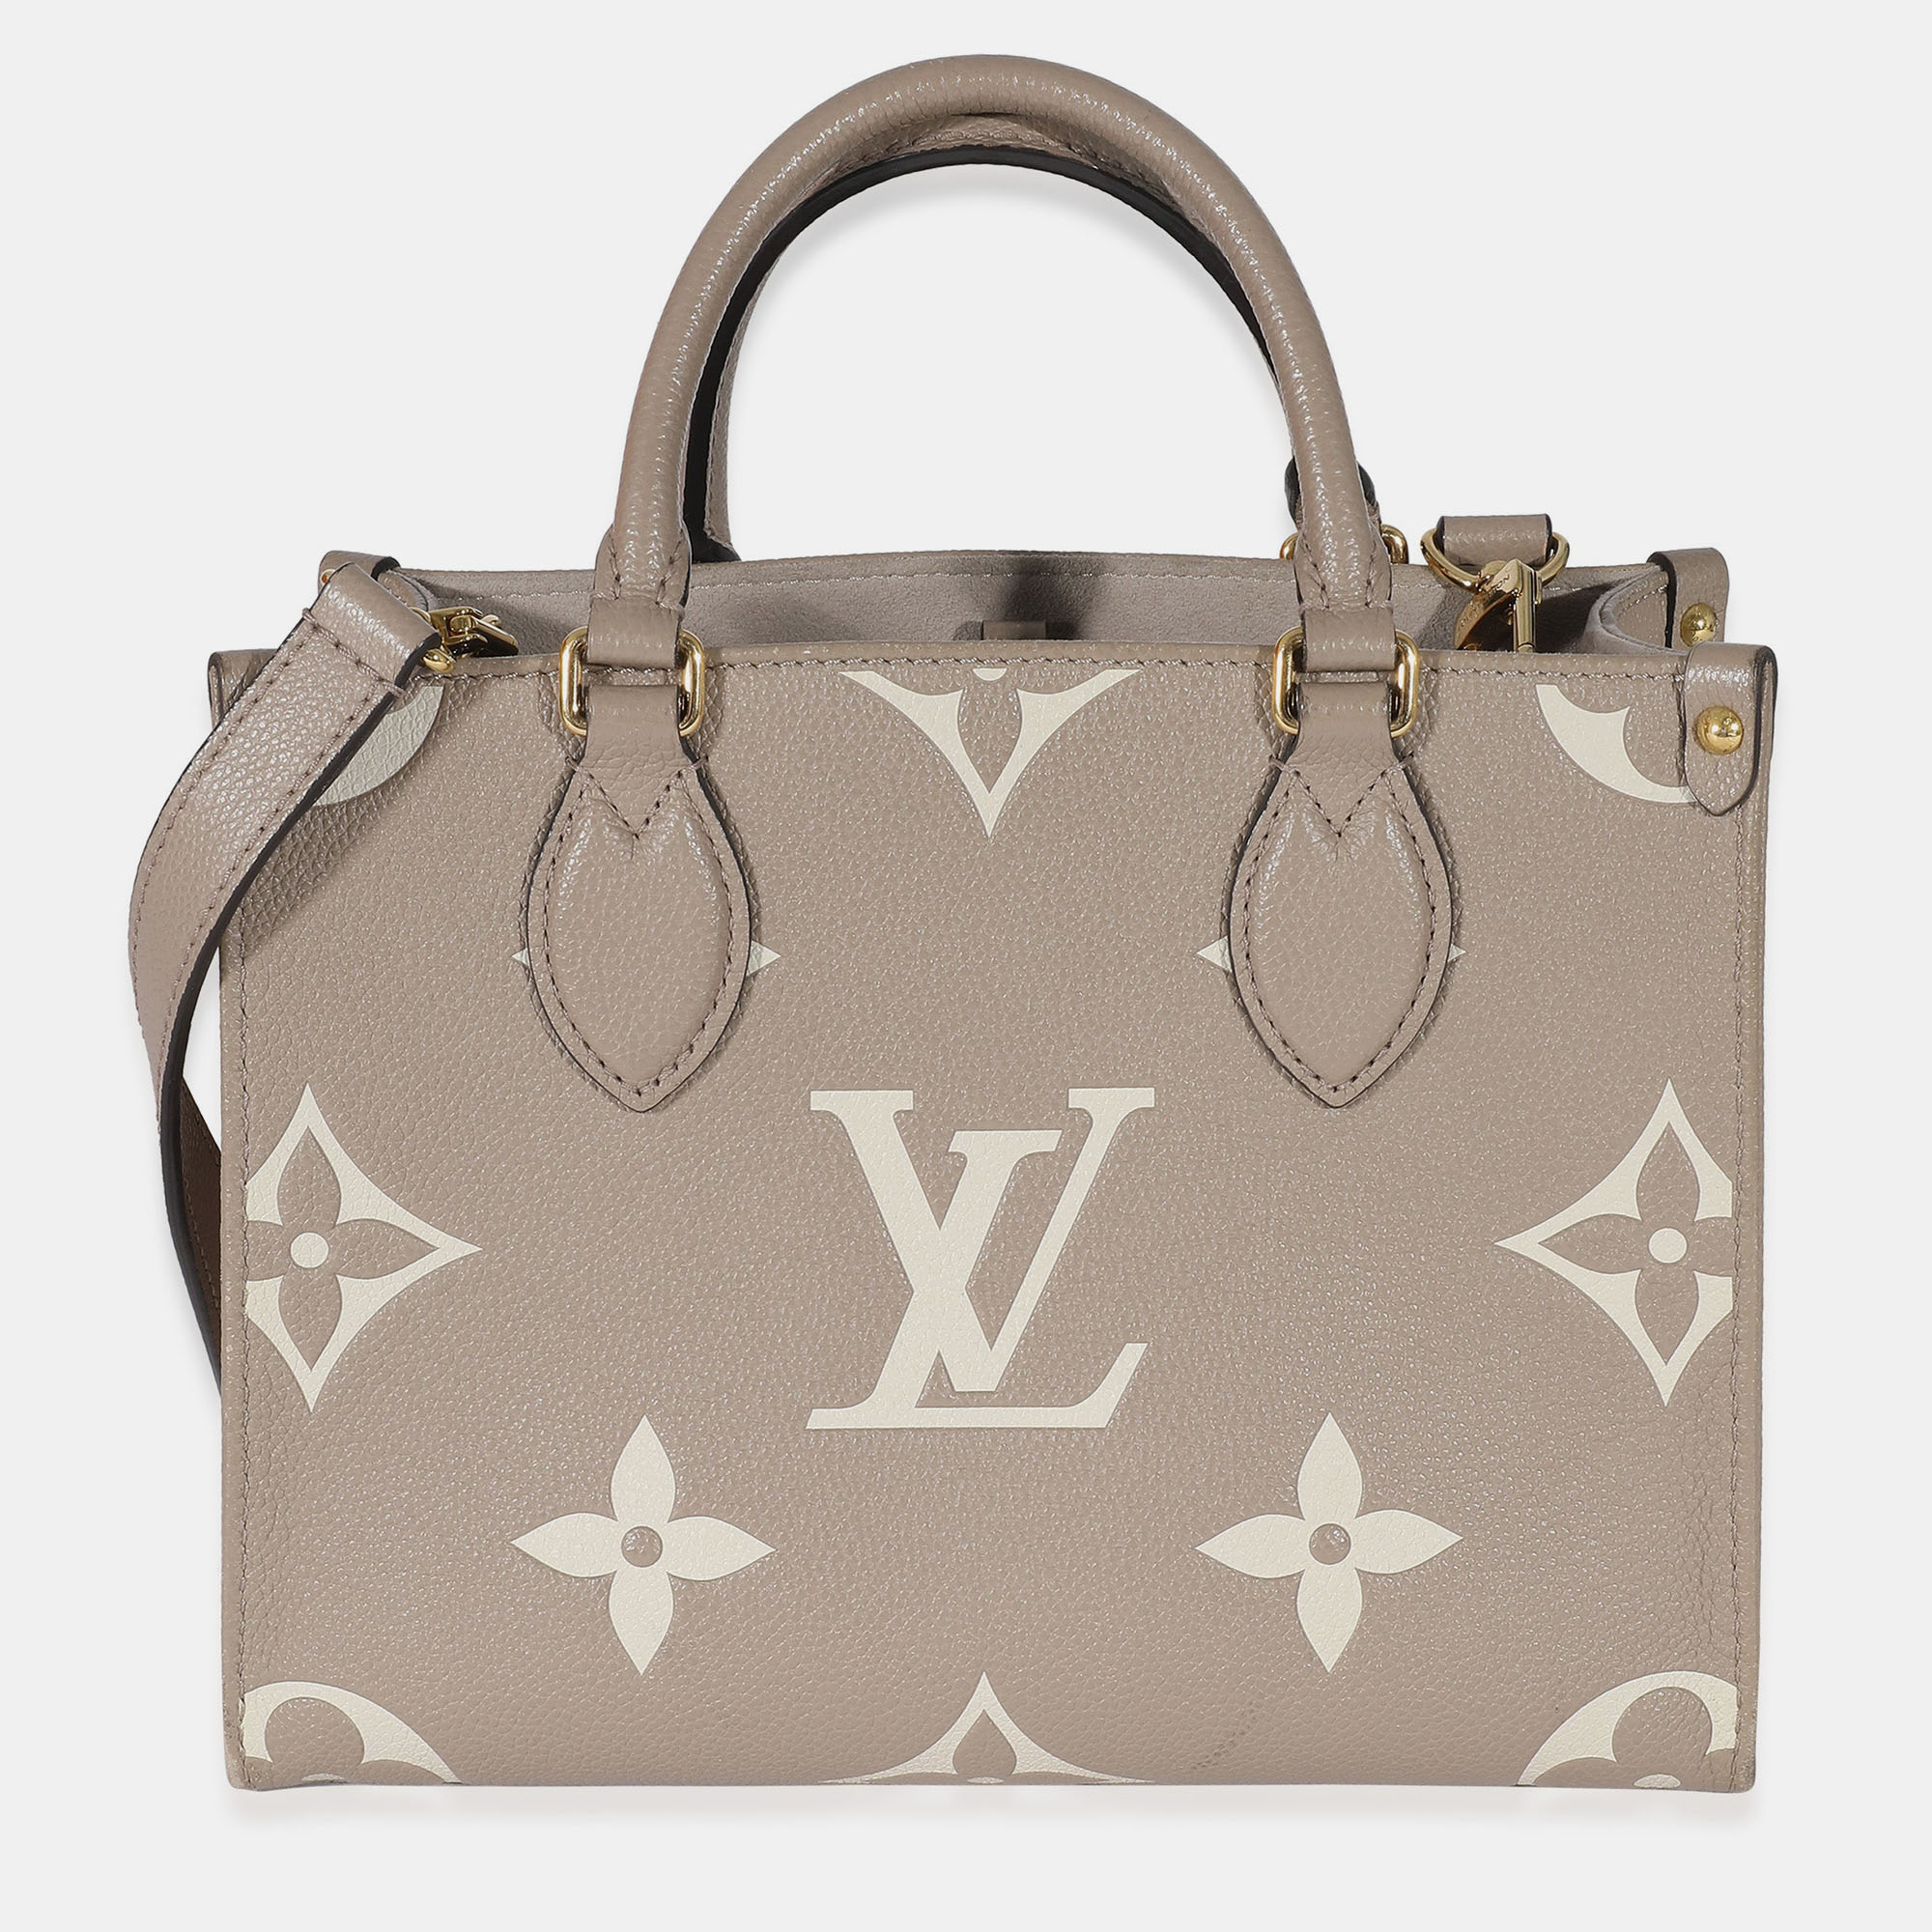 Louis Vuitton on X: Everyday indulgences. Elevate daily